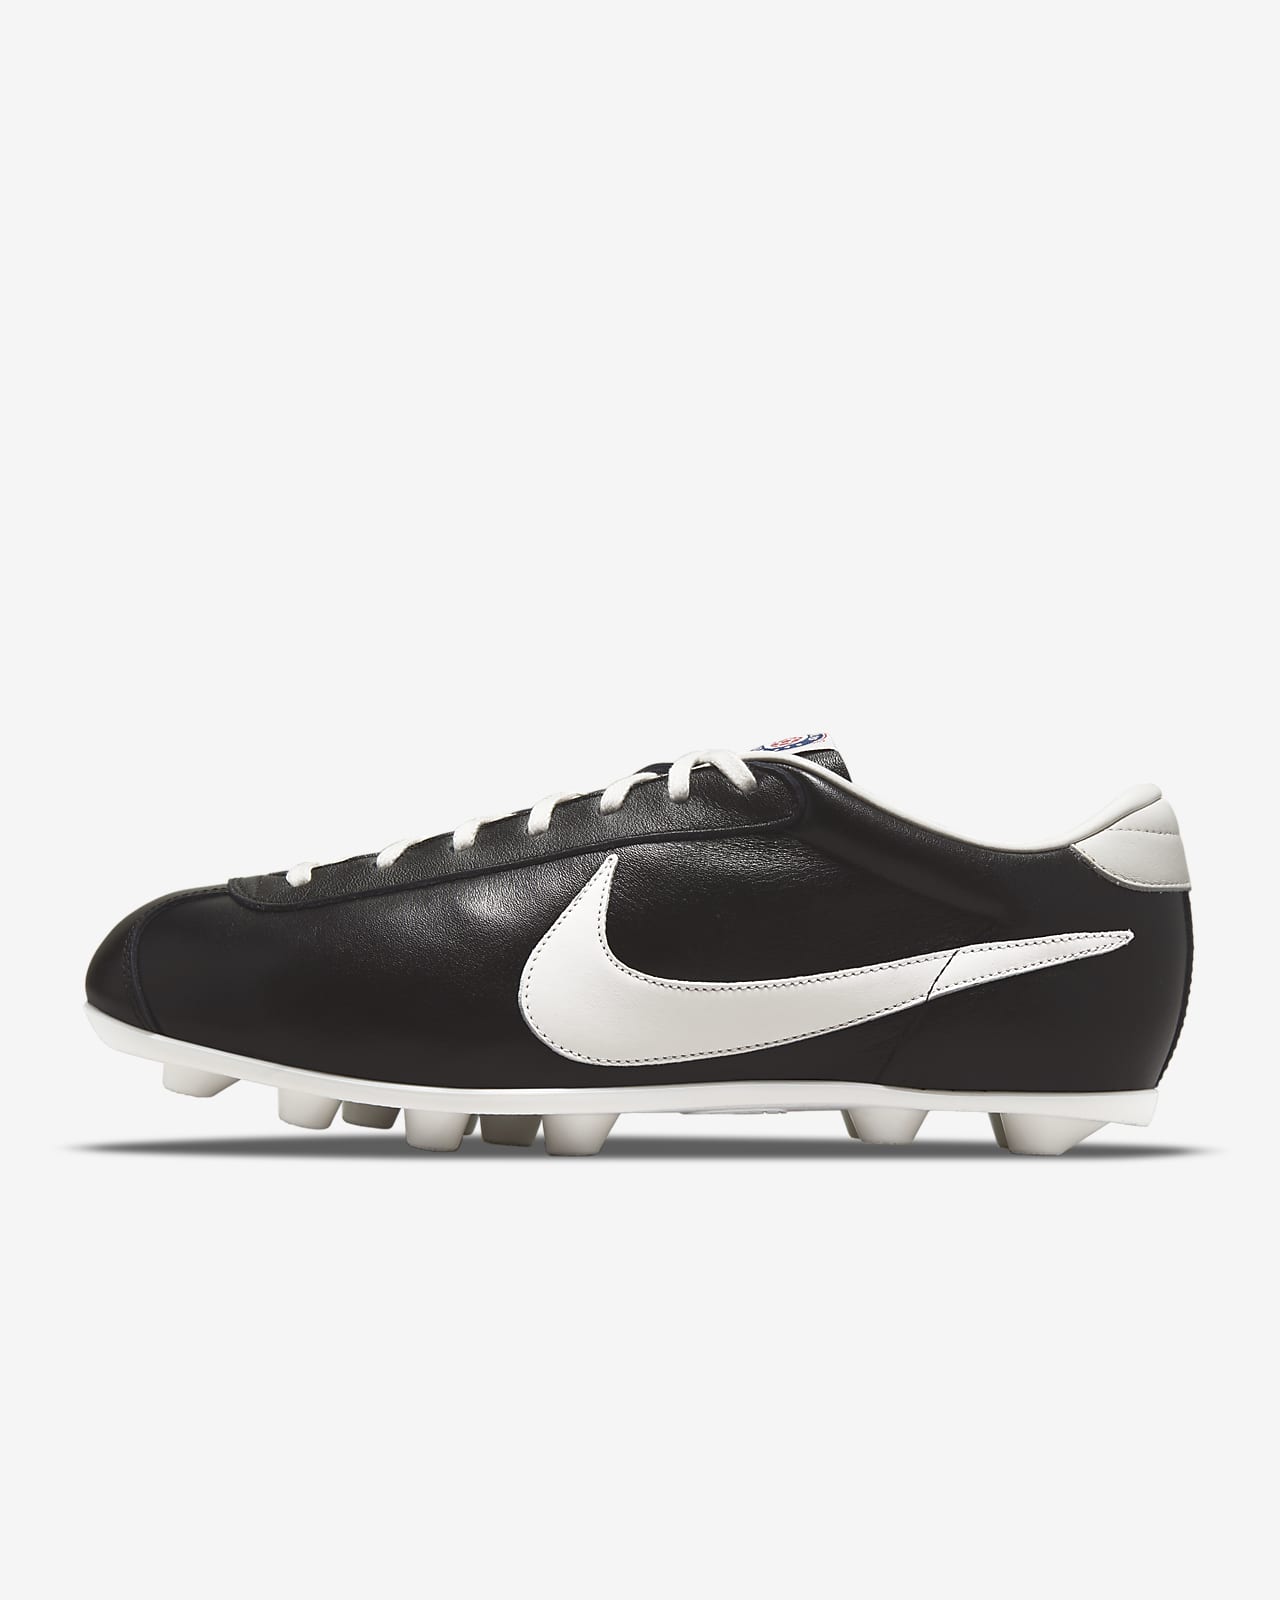 The Nike 1971 Firm-Ground Football Boot